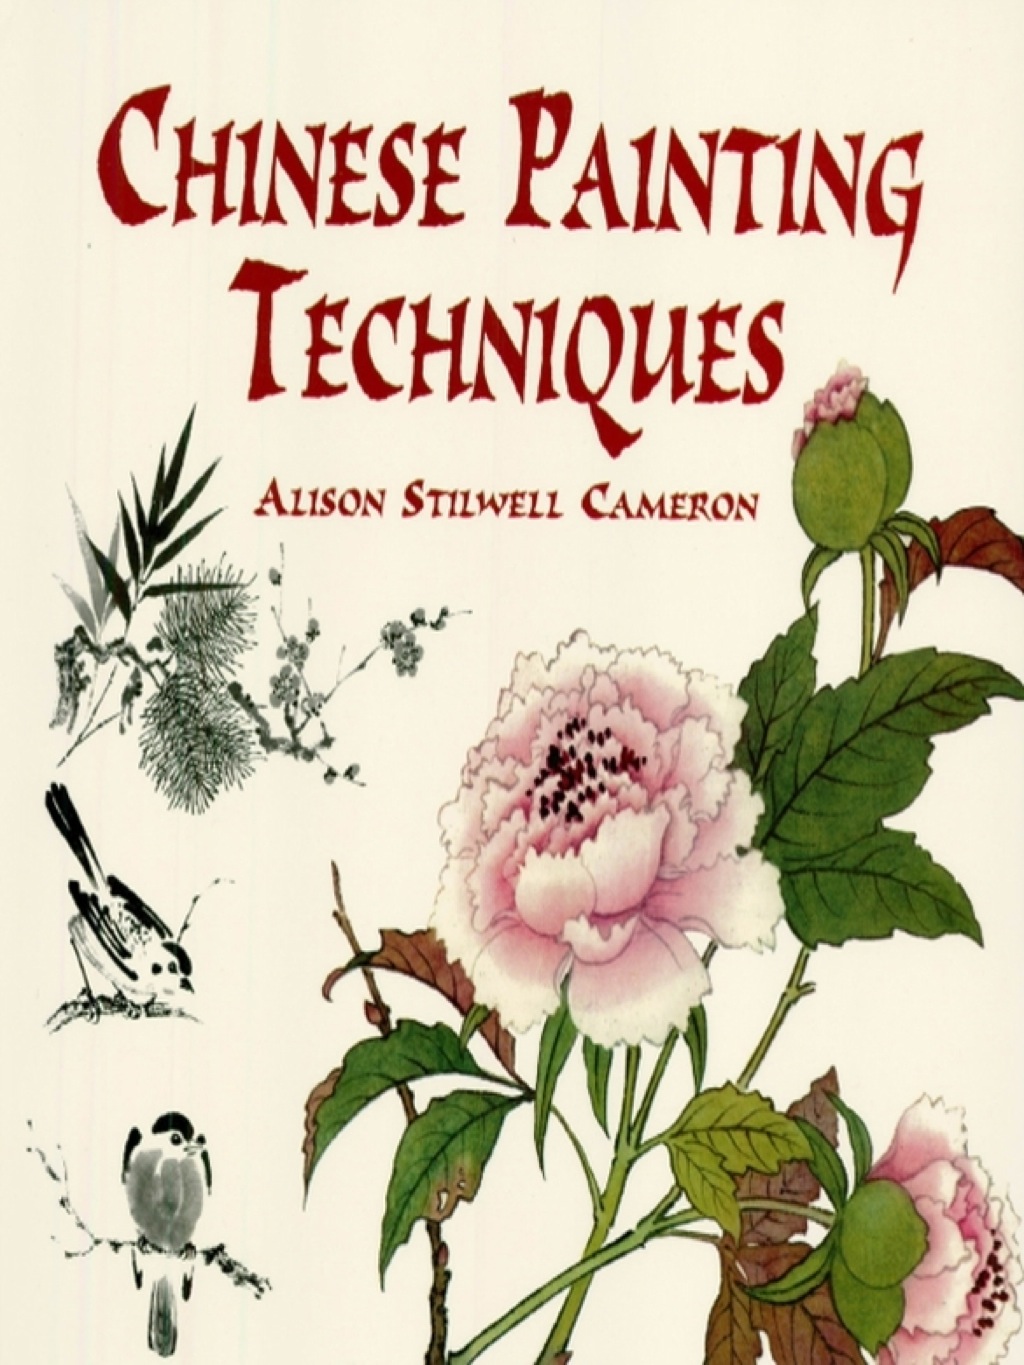 Chinese Painting Techniques (eBook) - Alison Stilwell Cameron,